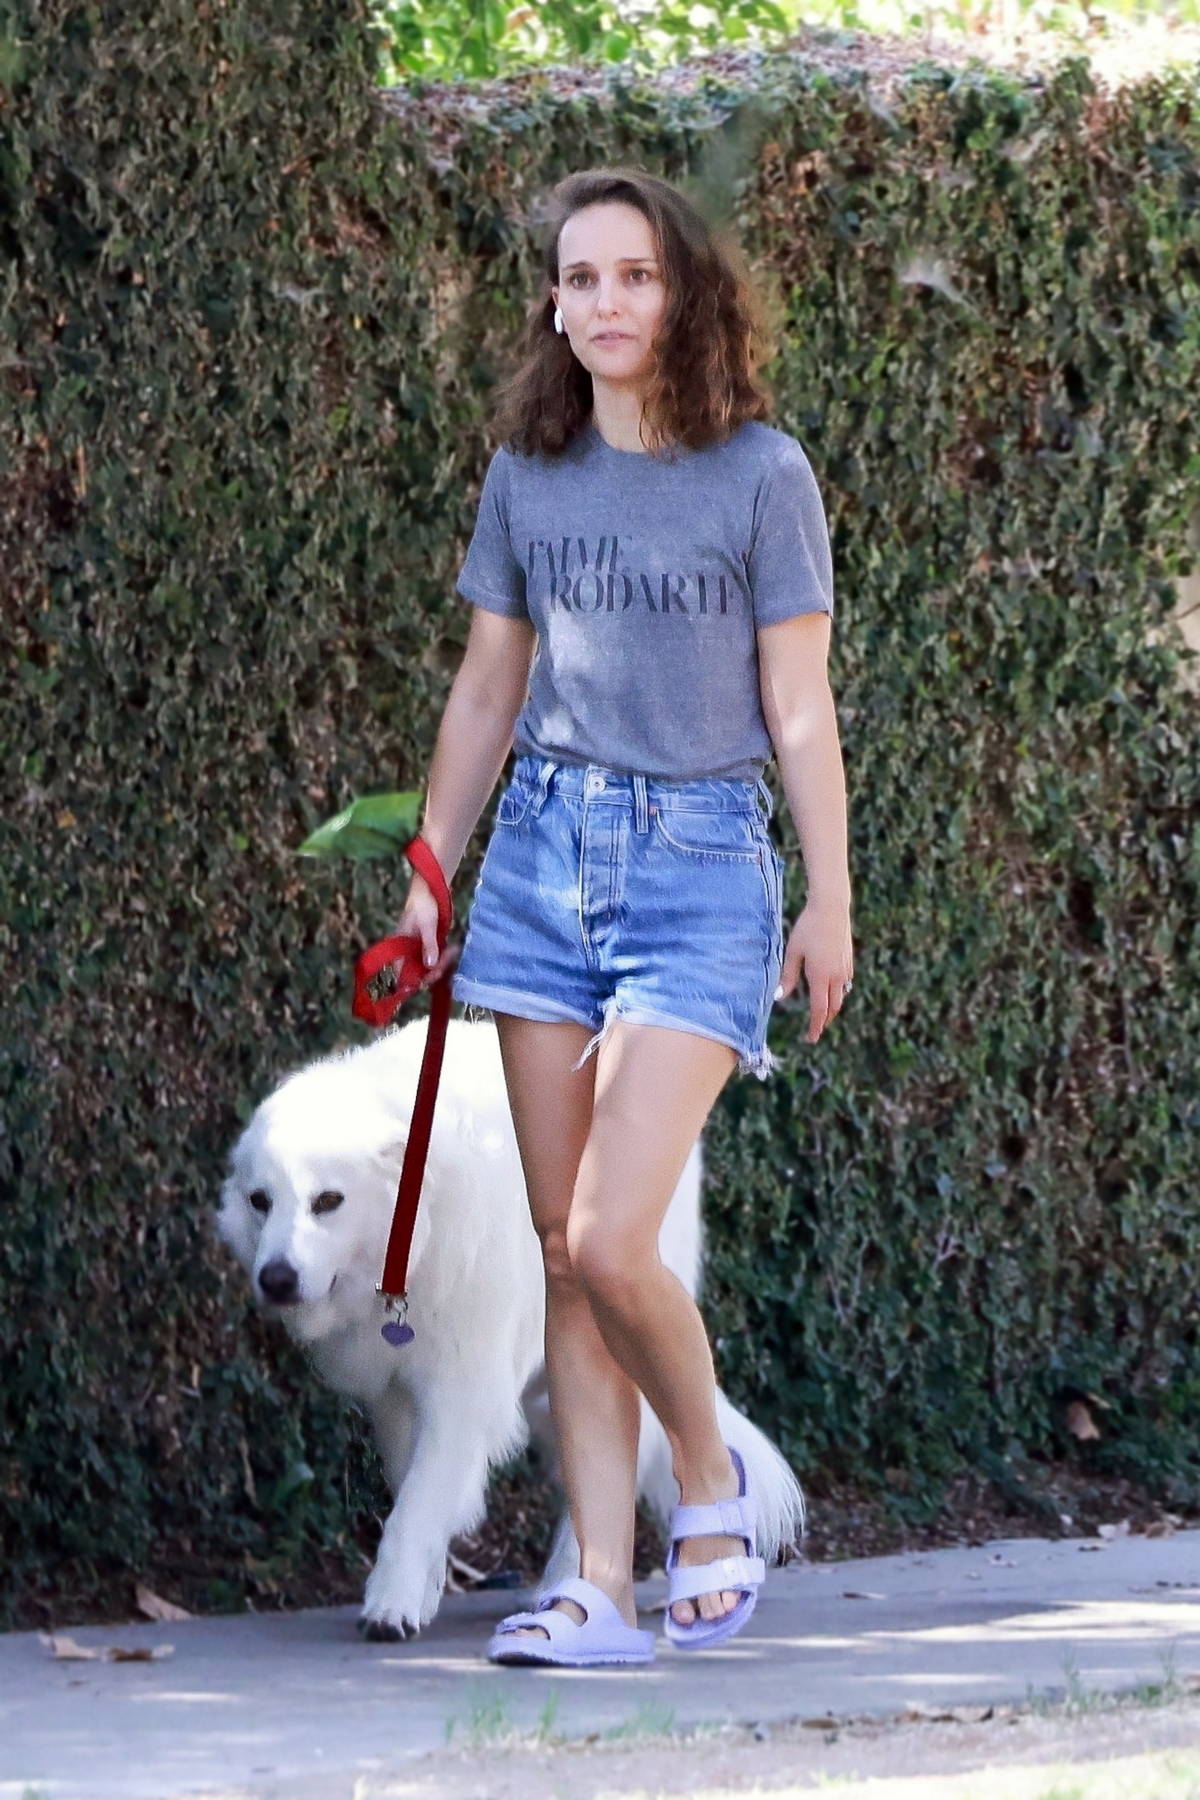 Natalie is shown here wearing our - Los Angeles Apparel